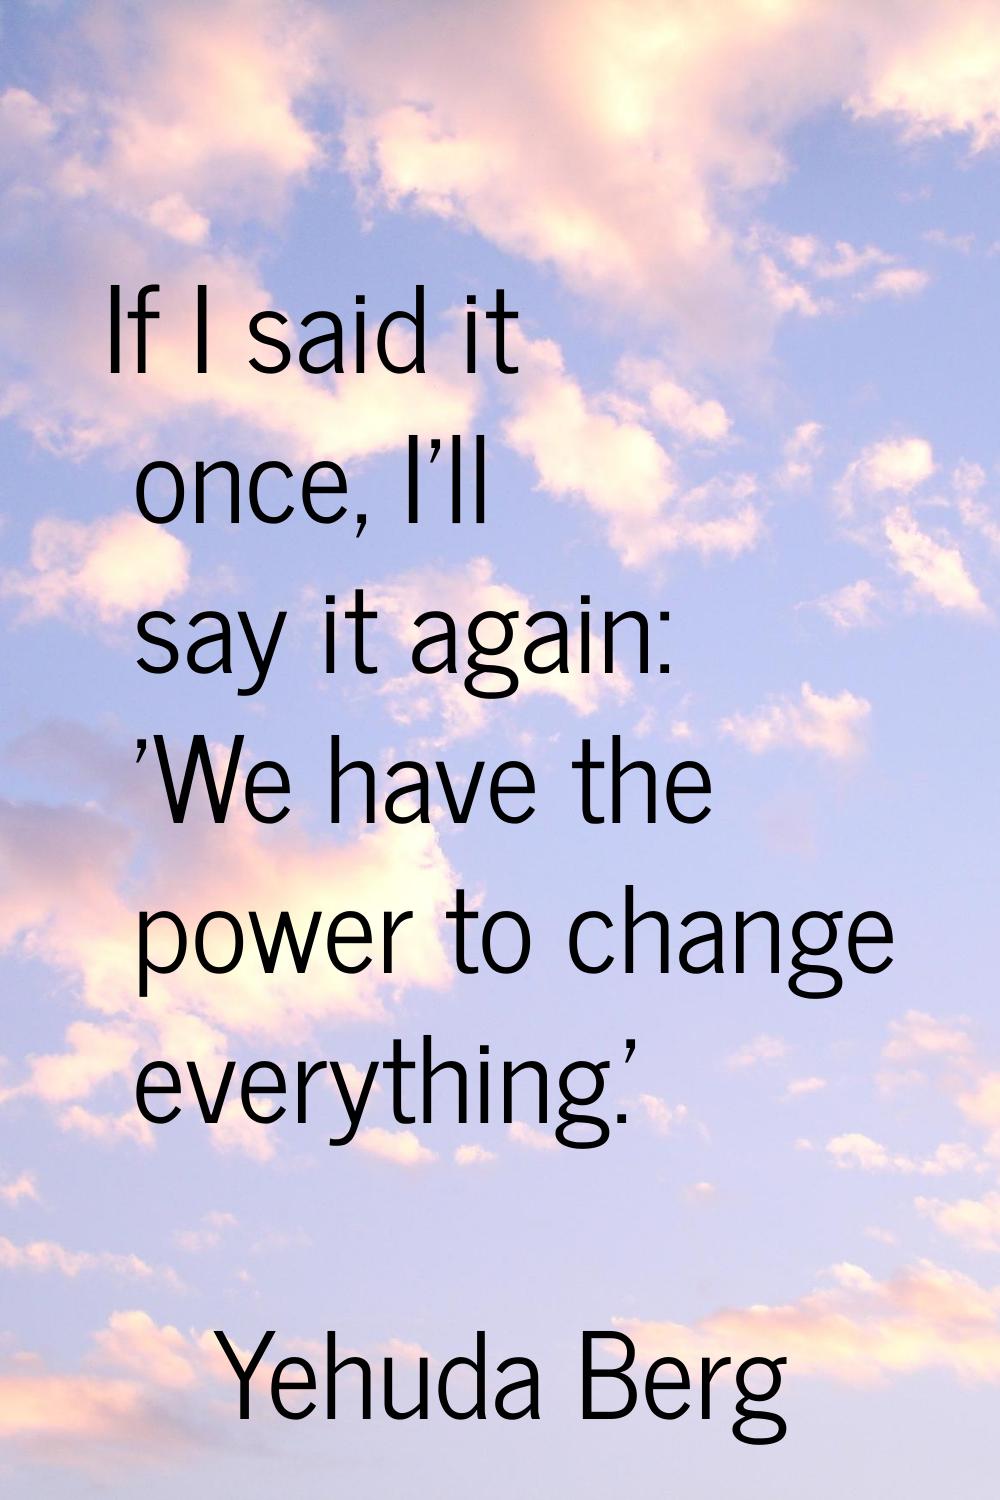 If I said it once, I'll say it again: 'We have the power to change everything.'